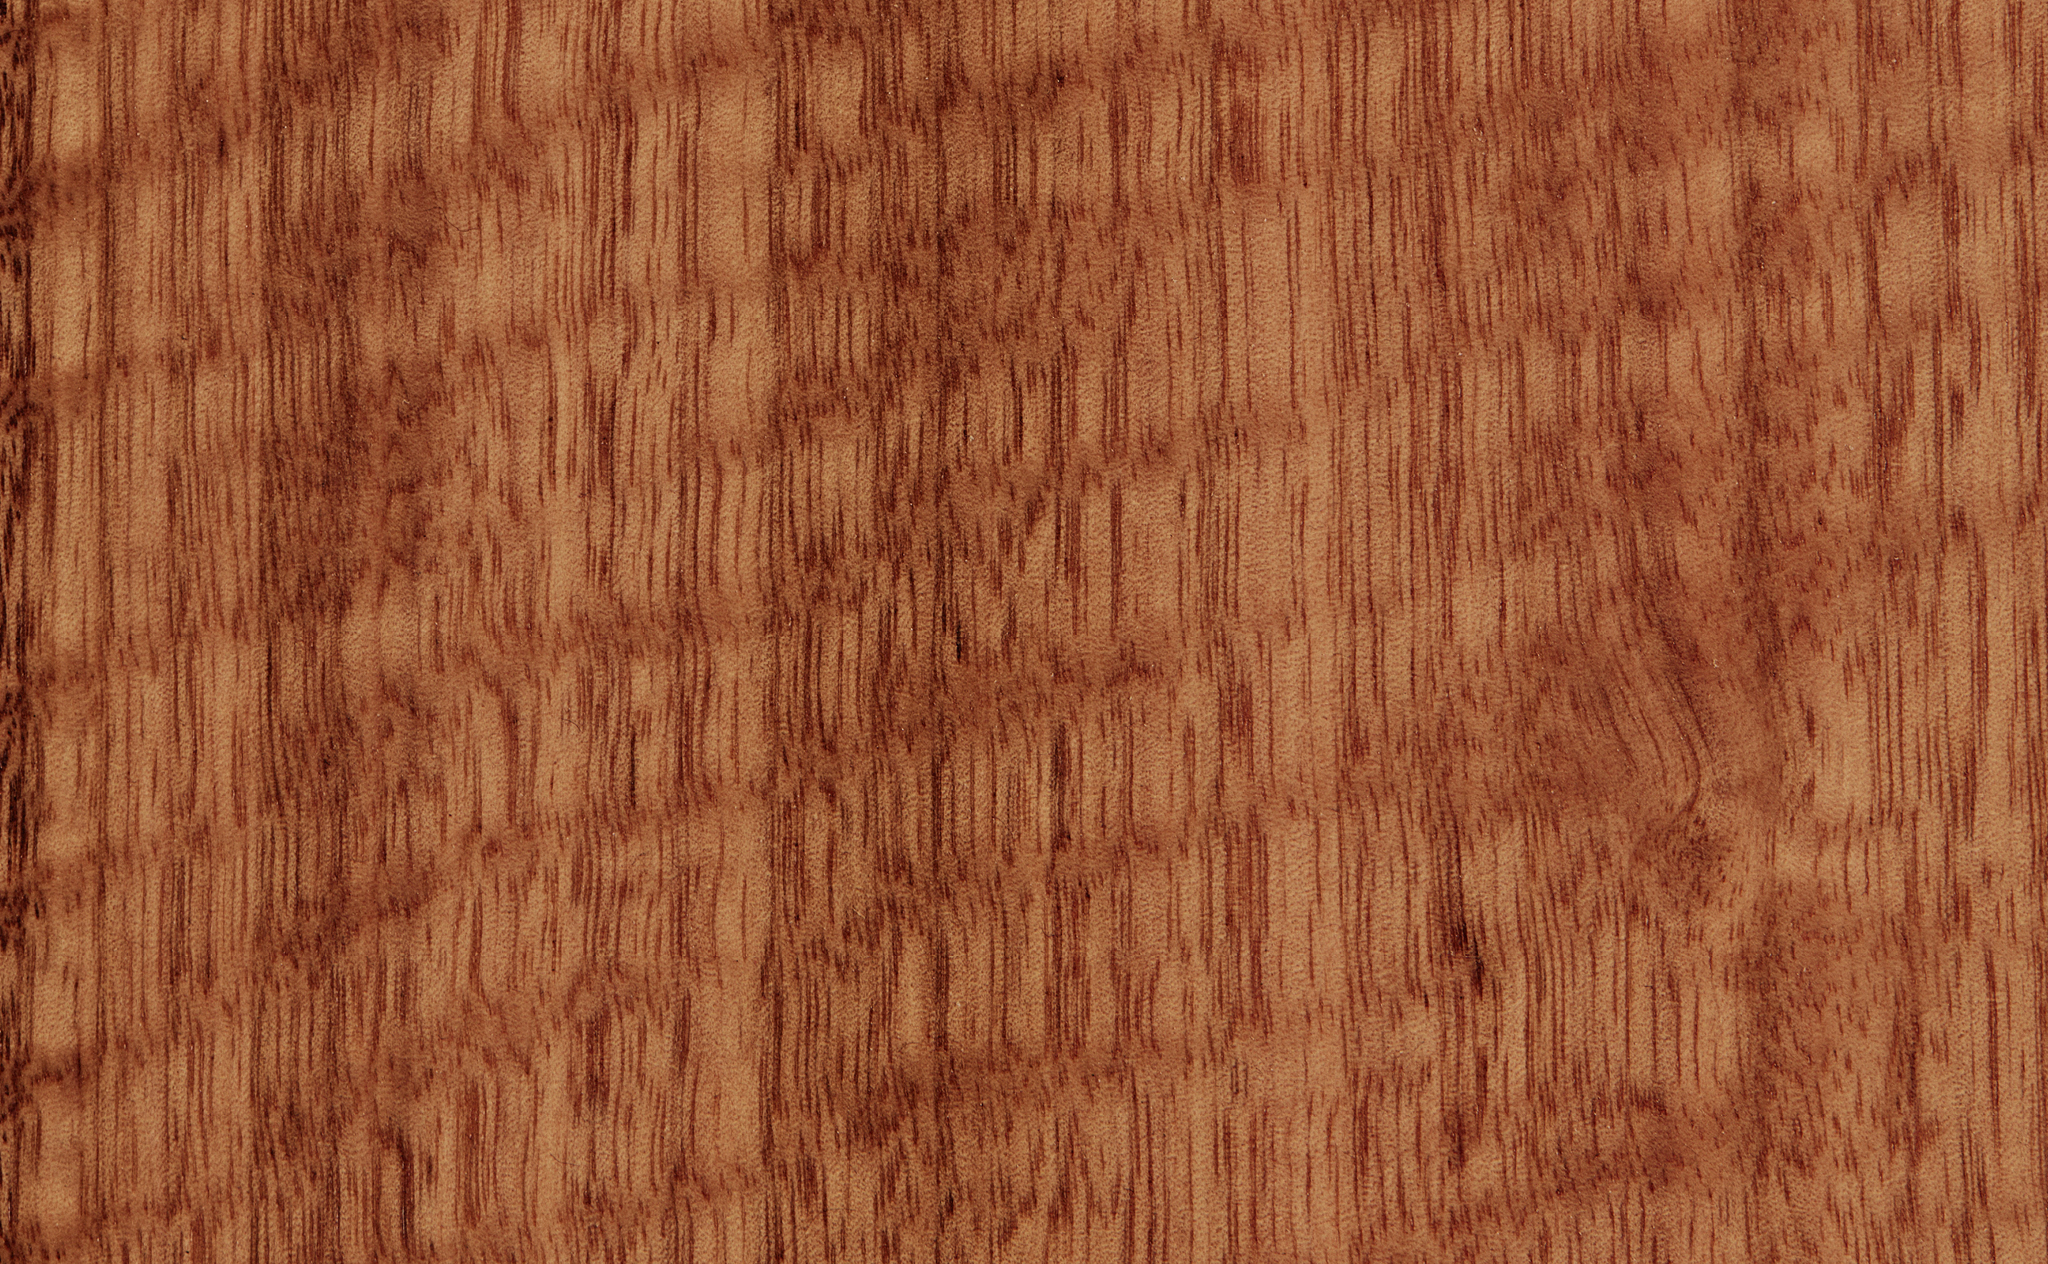 Ash Fiddle Back—Light Brown to pink with rippling feature throughout the timber. 